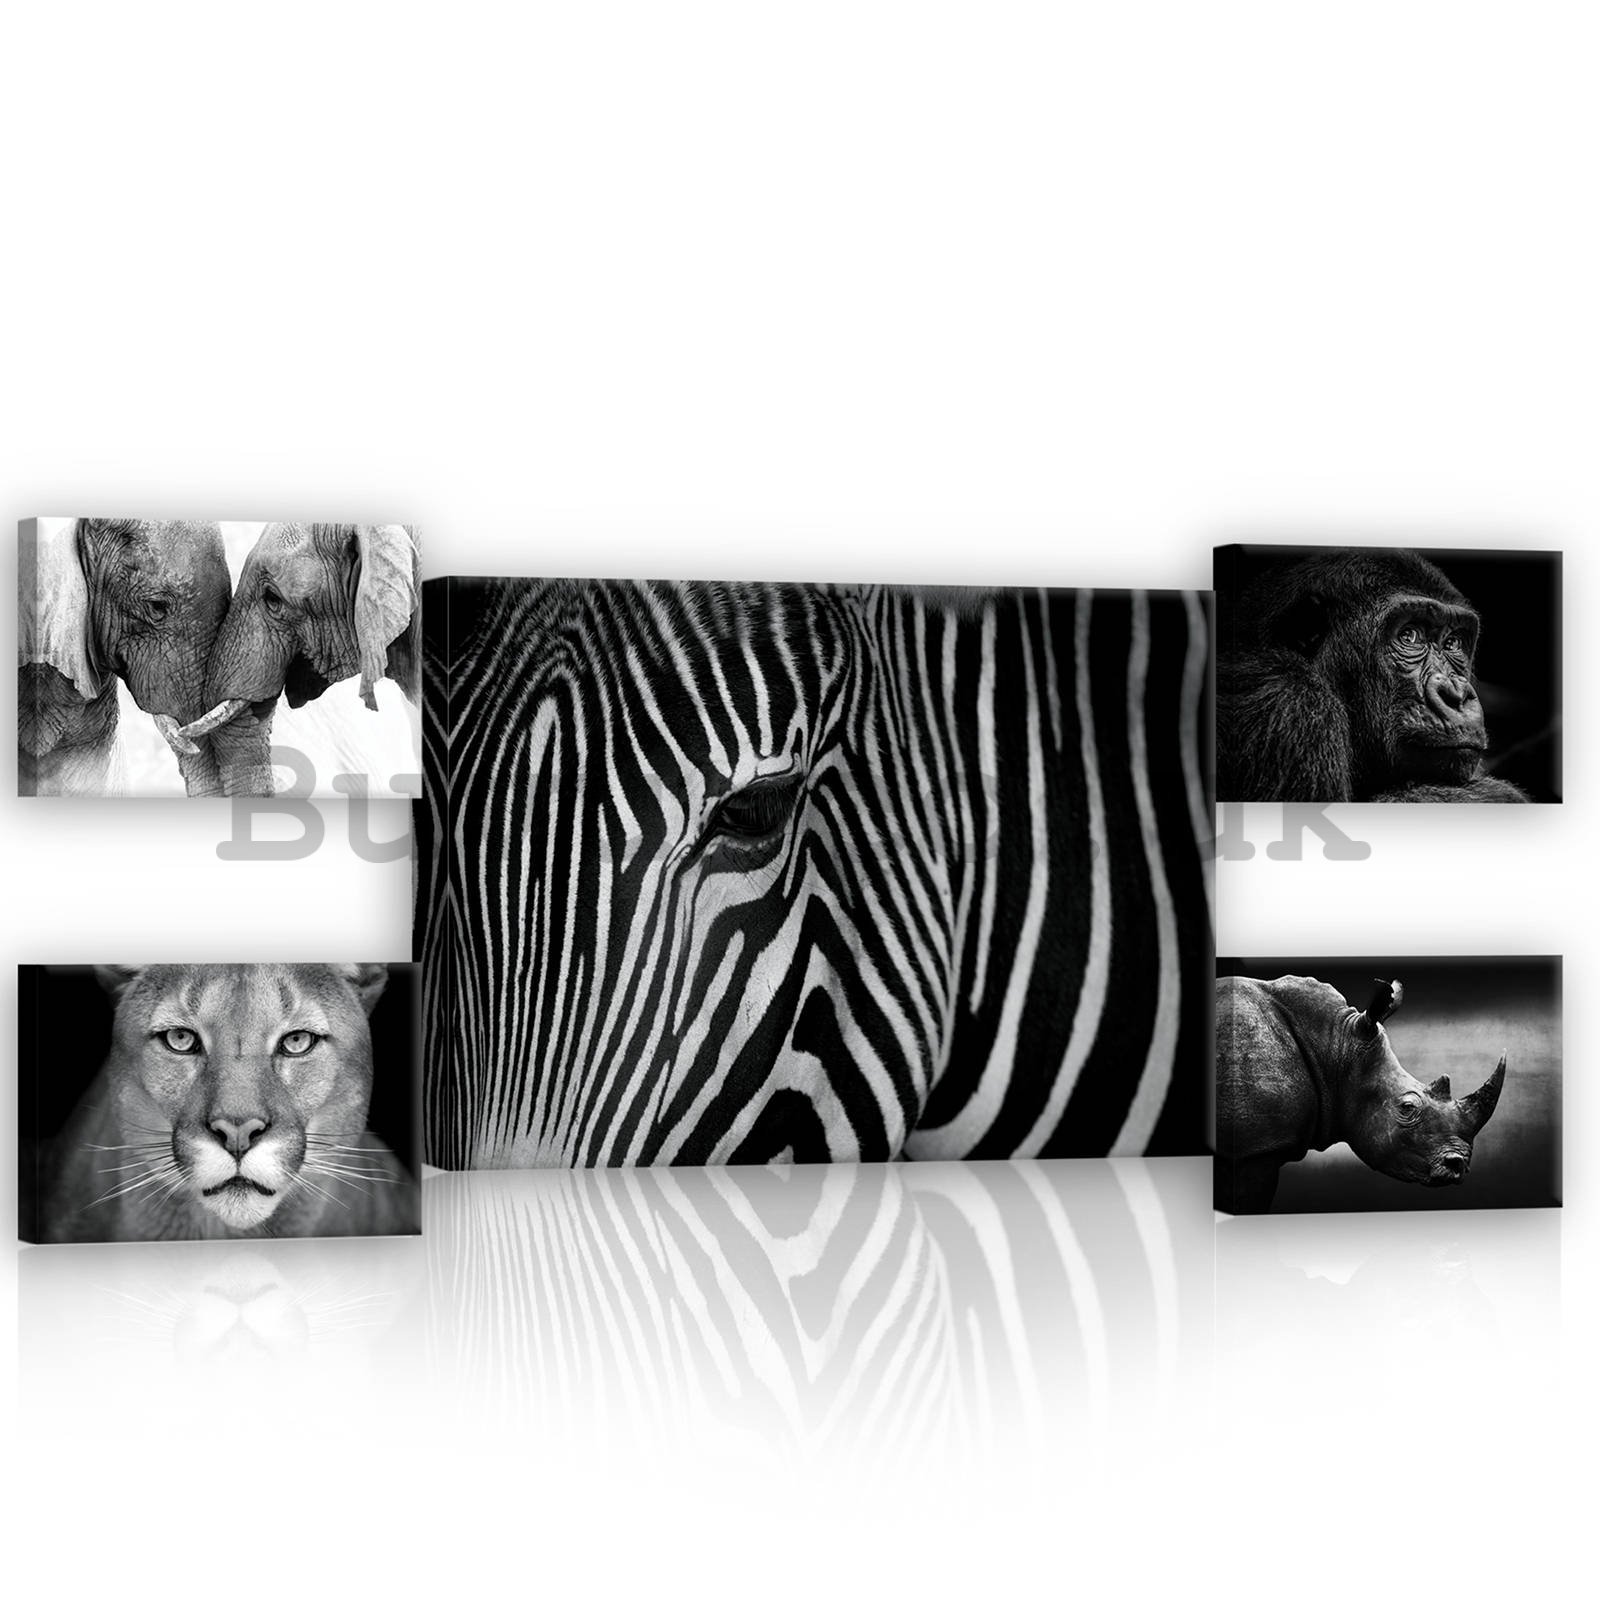 Painting on canvas: Black and white animals (2) - set 1pc 70x50 cm and 4pc 32,4x22,8 cm